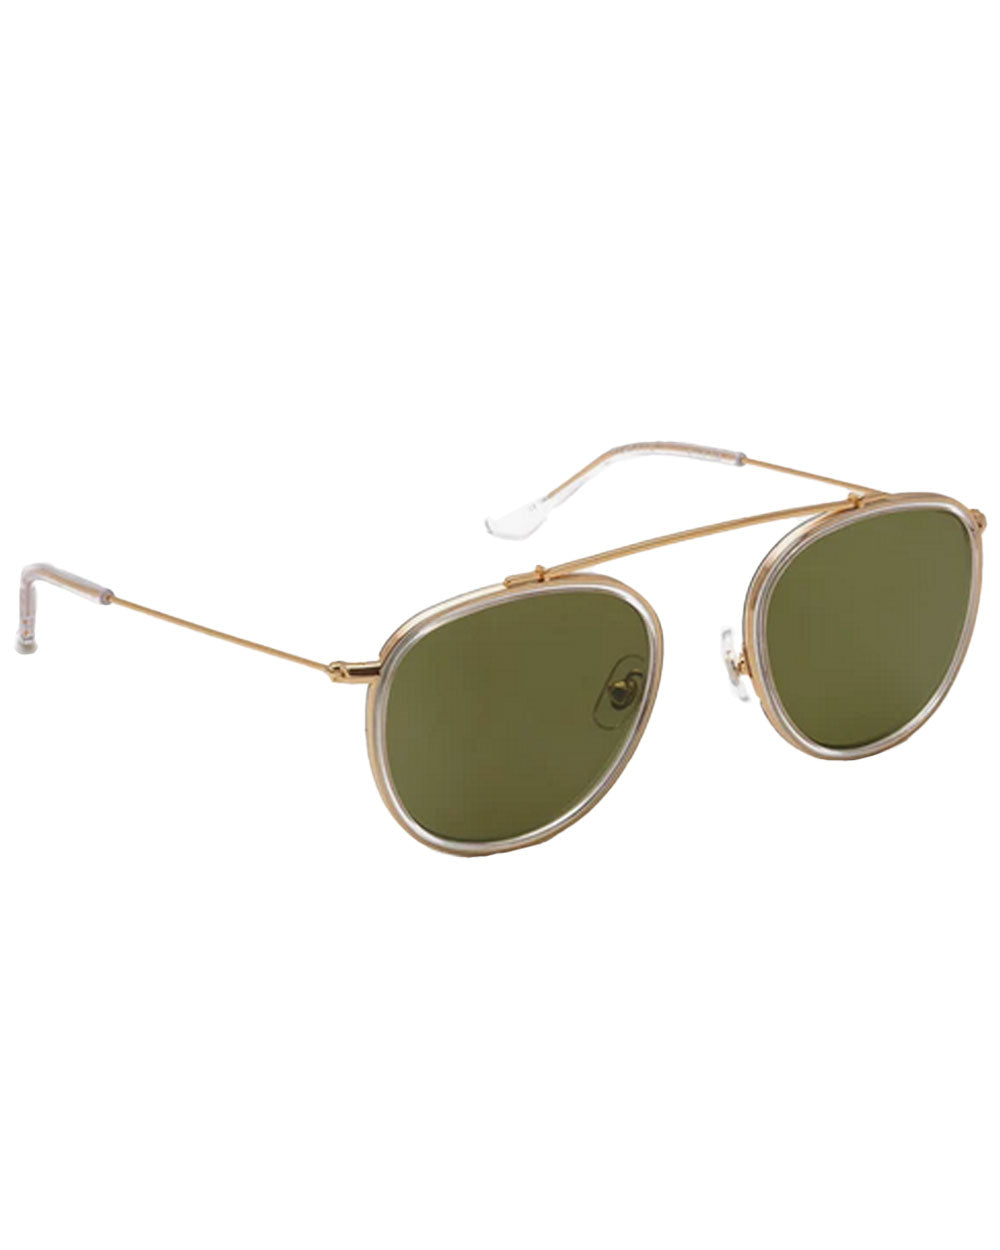 Chartres Sunglasses in Crystal Polarized